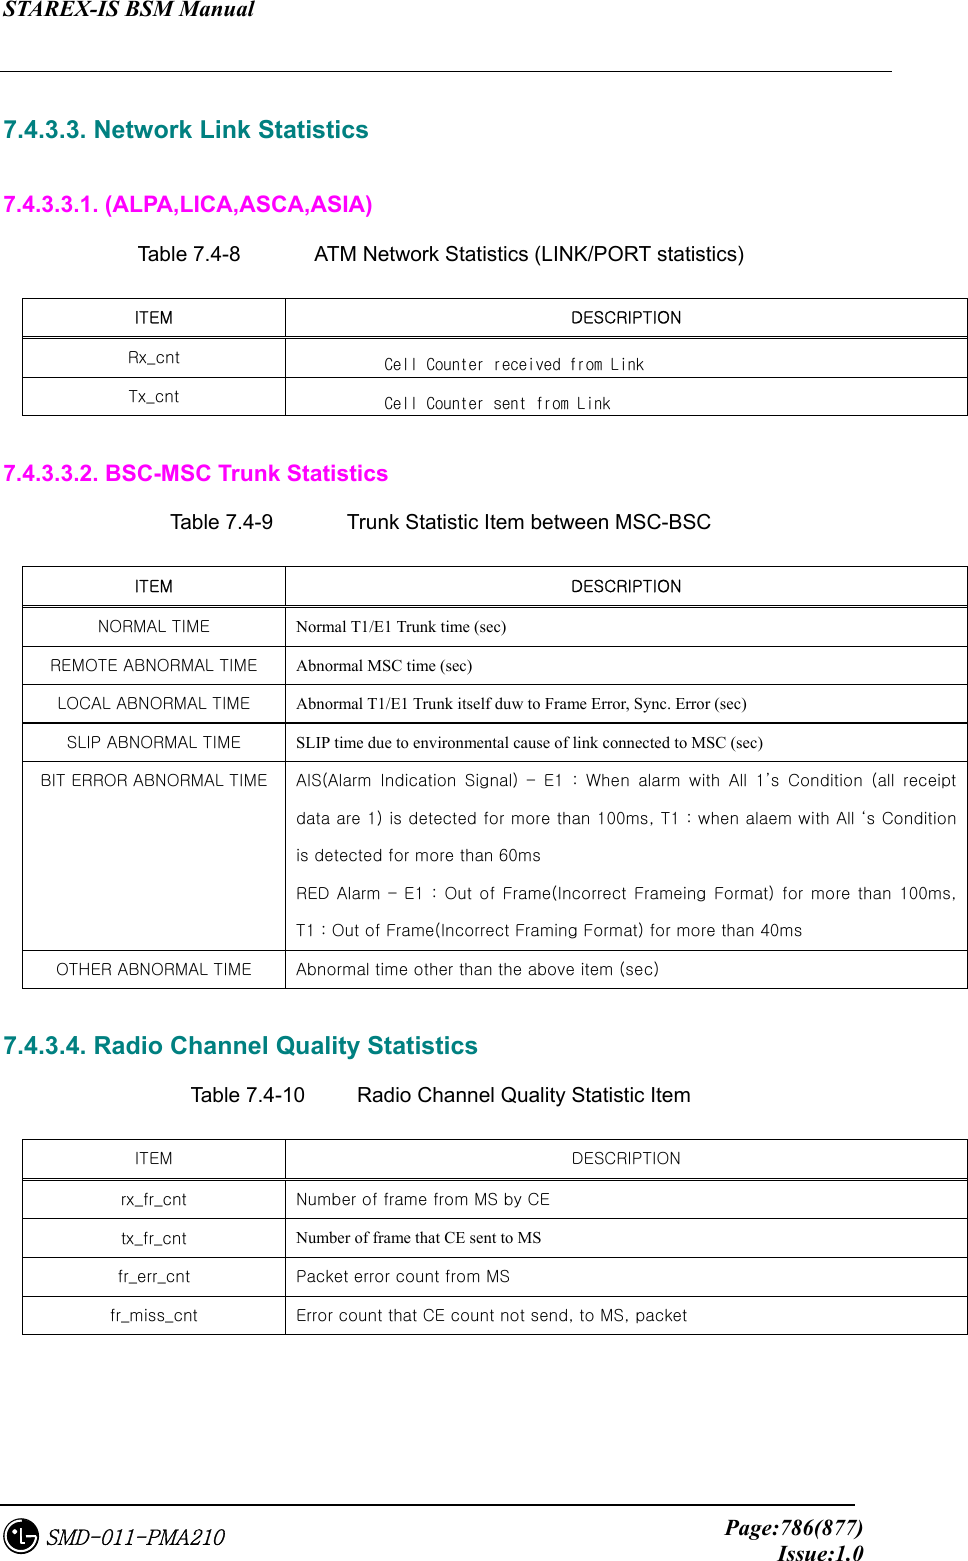 STAREX-IS BSM Manual     Page:786(877)Issue:1.0SMD-011-PMA210  7.4.3.3. Network Link Statistics      7.4.3.3.1. (ALPA,LICA,ASCA,ASIA) Table 7.4-8    ATM Network Statistics (LINK/PORT statistics)   ITEM  DESCRIPTION Rx_cnt  Cell Counter received from Link  Tx_cnt  Cell Counter sent from Link  7.4.3.3.2. BSC-MSC Trunk Statistics   Table 7.4-9    Trunk Statistic Item between MSC-BSC   ITEM  DESCRIPTION NORMAL TIME  Normal T1/E1 Trunk time (sec) REMOTE ABNORMAL TIME  Abnormal MSC time (sec) LOCAL ABNORMAL TIME  Abnormal T1/E1 Trunk itself duw to Frame Error, Sync. Error (sec) SLIP ABNORMAL TIME  SLIP time due to environmental cause of link connected to MSC (sec) BIT ERROR ABNORMAL TIME  AIS(Alarm  Indication  Signal)  –  E1  :  When  alarm  with  All  1’s  Condition  (all  receipt data are 1) is detected for more than 100ms, T1 : when alaem with All ‘s Condition is detected for more than 60ms RED Alarm – E1 : Out of Frame(Incorrect Frameing Format) for more  than  100ms, T1 : Out of Frame(Incorrect Framing Format) for more than 40ms OTHER ABNORMAL TIME  Abnormal time other than the above item (sec)  7.4.3.4. Radio Channel Quality Statistics Table 7.4-10  Radio Channel Quality Statistic Item   ITEM  DESCRIPTION rx_fr_cnt  Number of frame from MS by CE   tx_fr_cnt  Number of frame that CE sent to MS   fr_err_cnt  Packet error count from MS   fr_miss_cnt  Error count that CE count not send, to MS, packet    